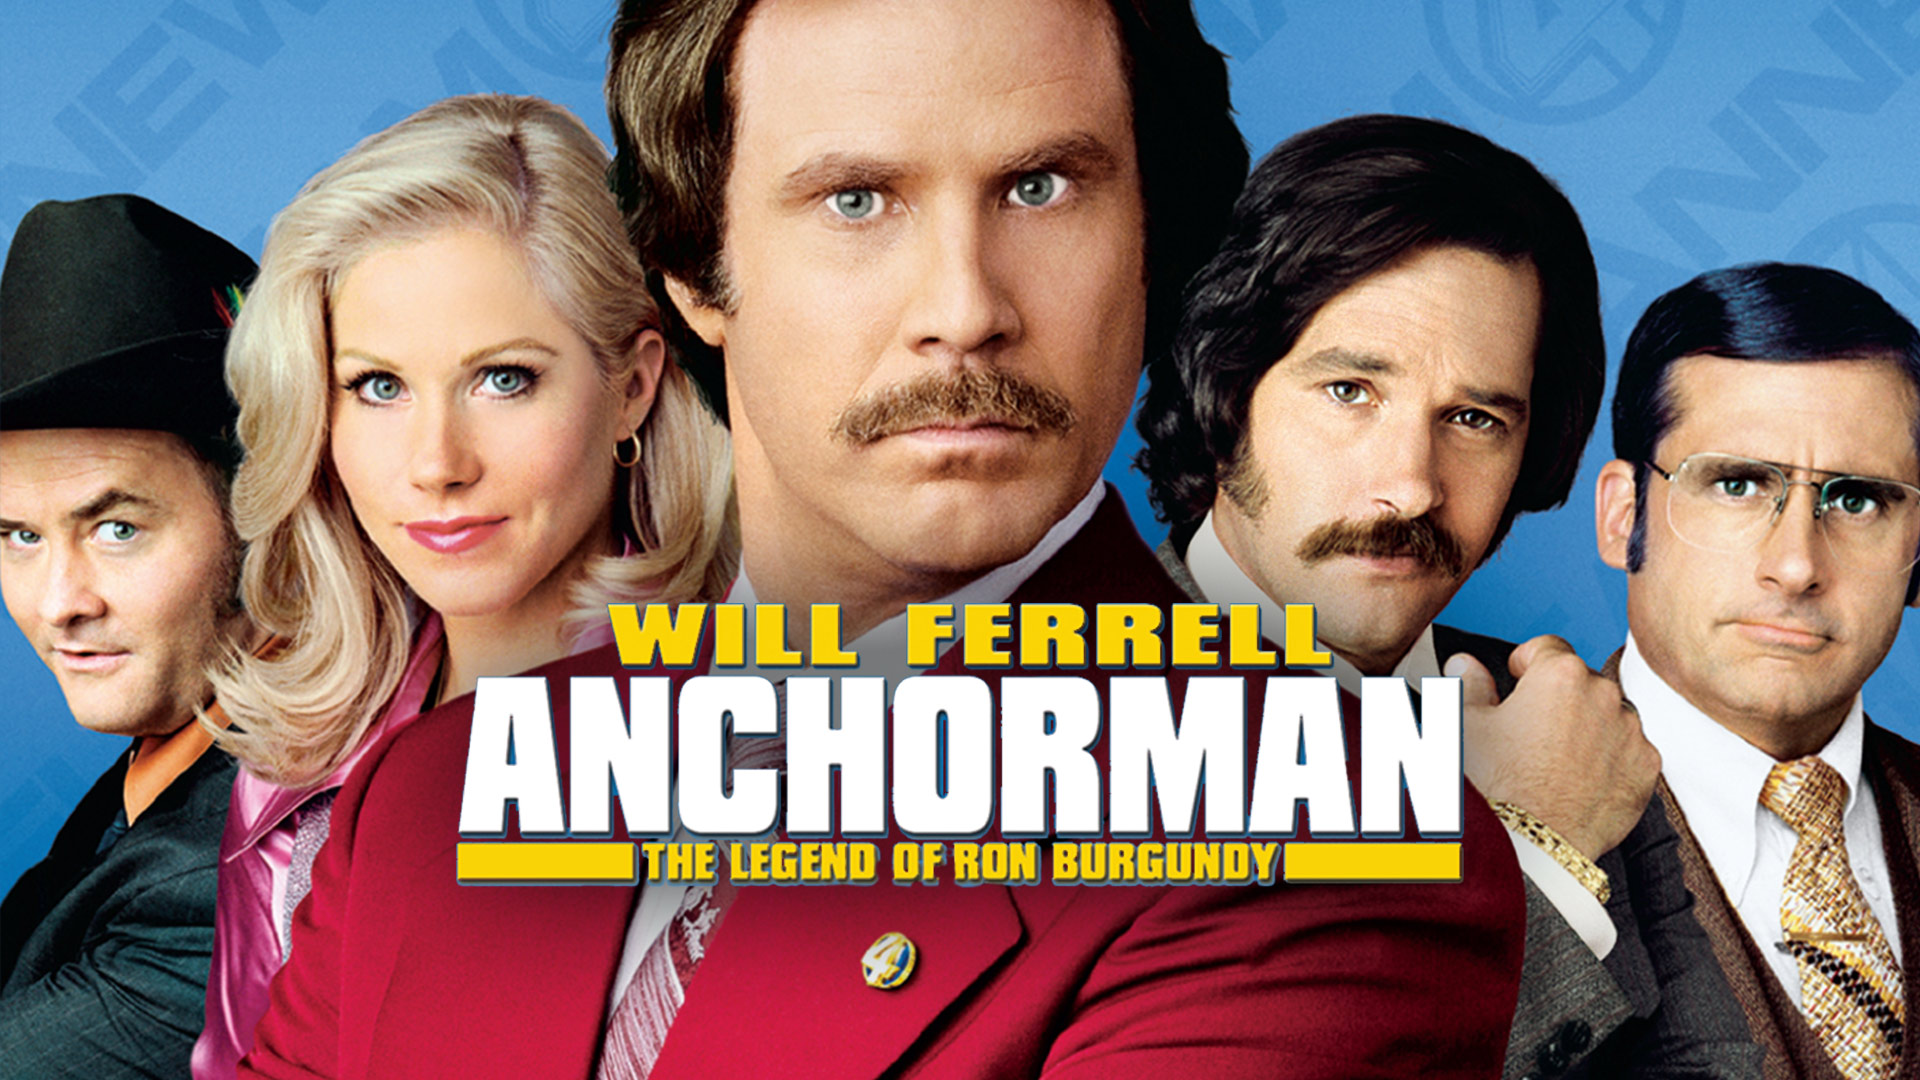 20 Best Will Ferrell Movies That Are A Must Watch!